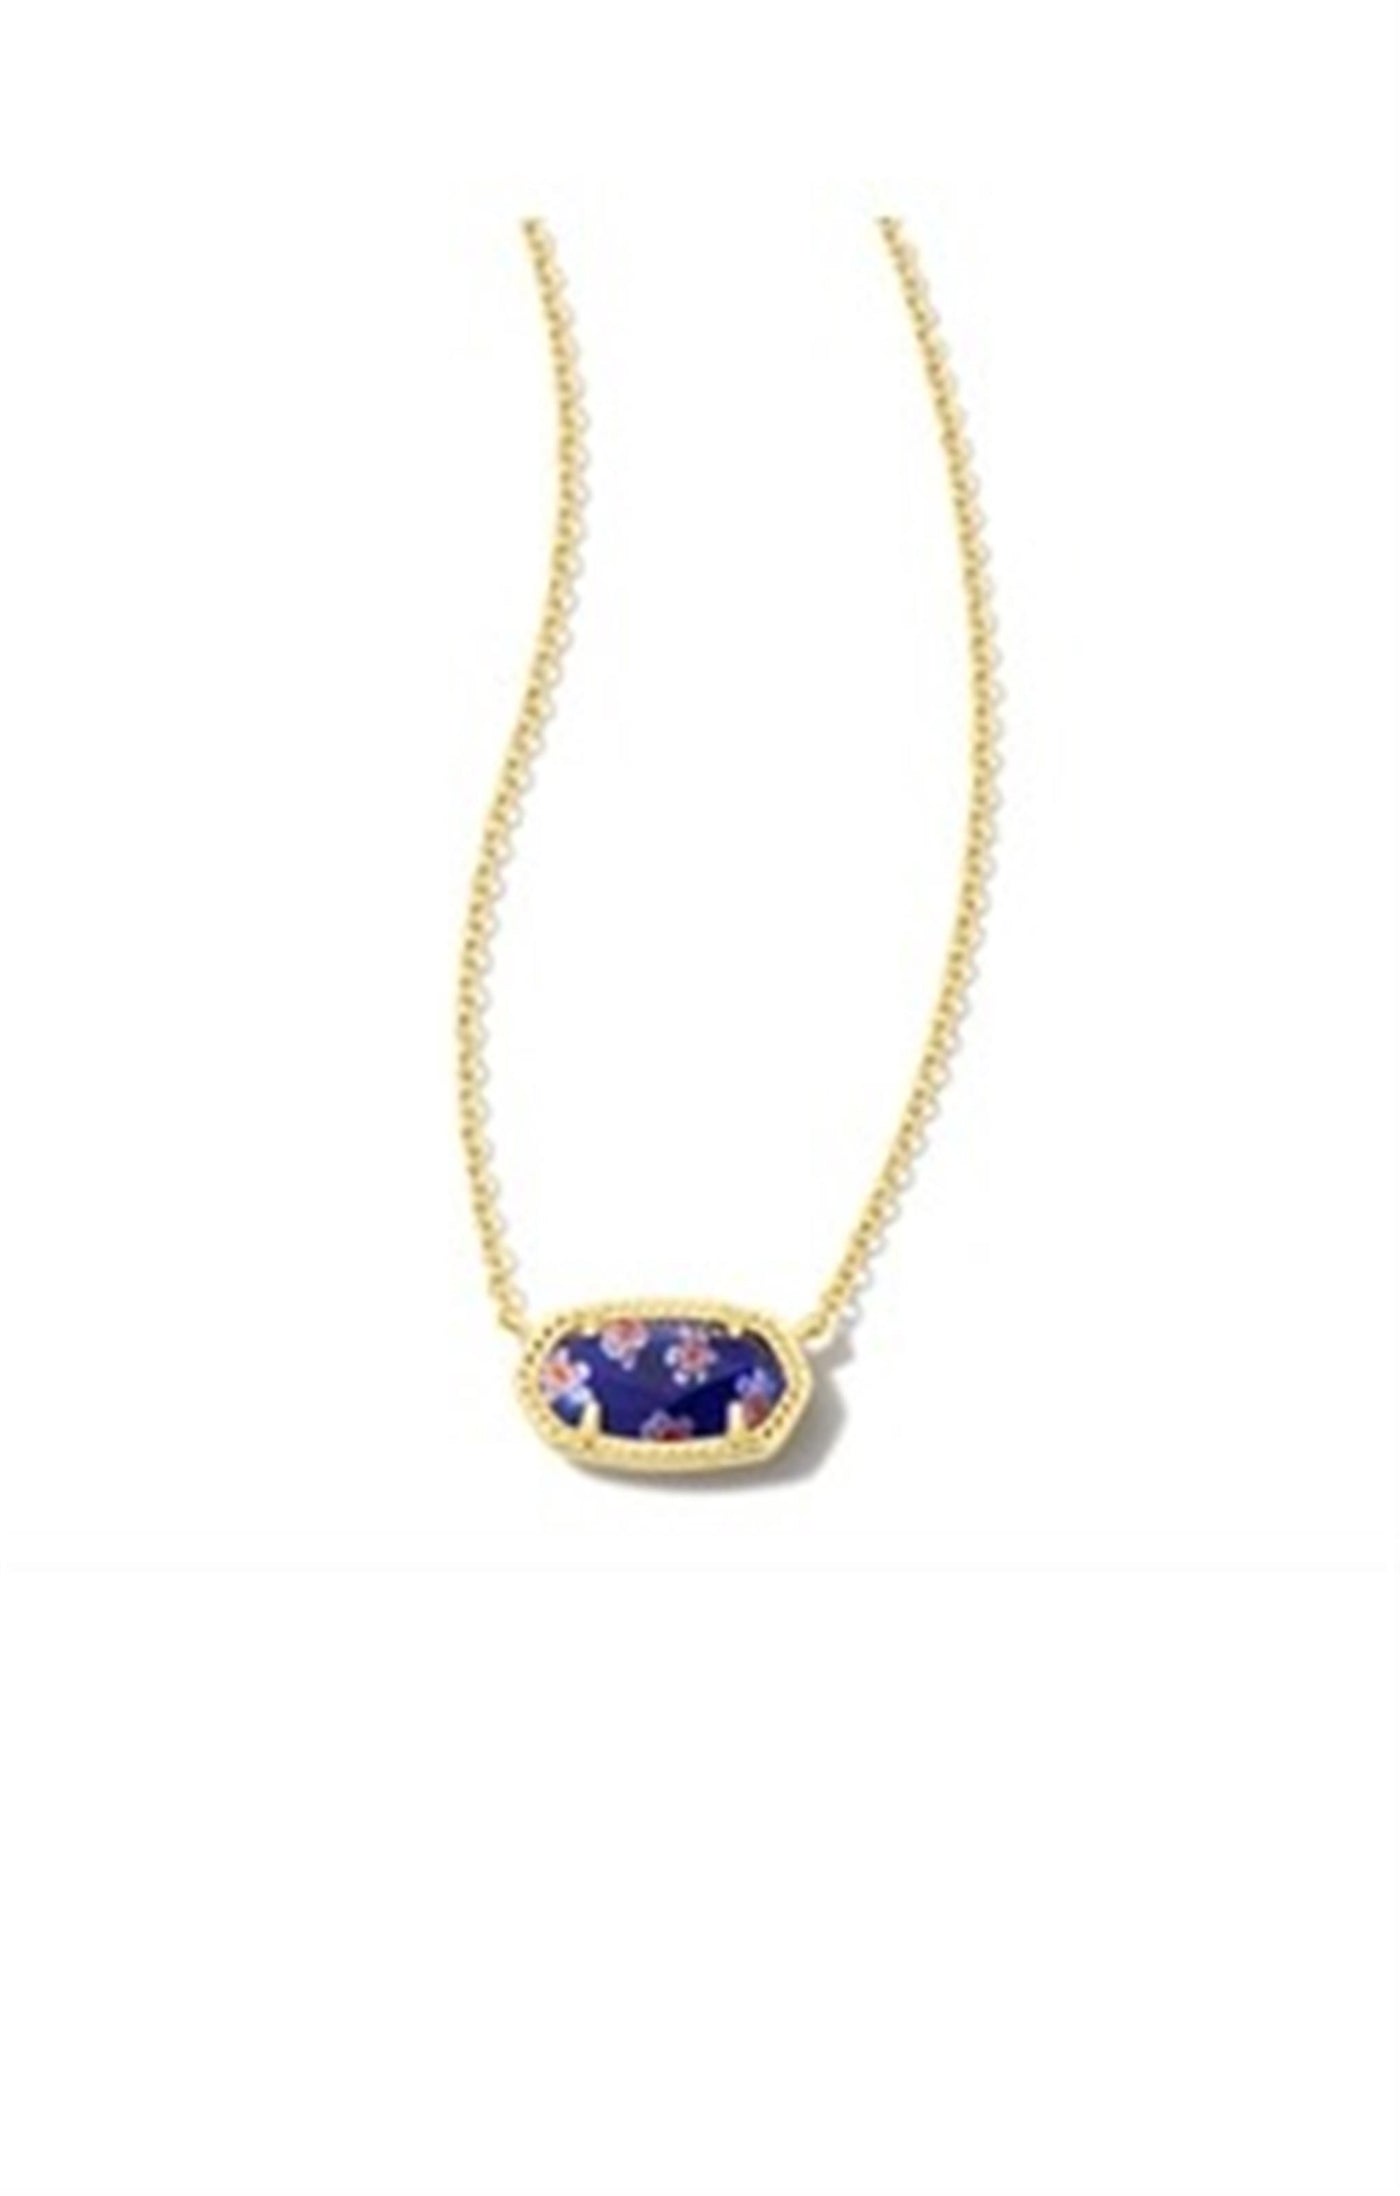 Gold Tone Necklace Featuring Cobalt Blue Mosaic by Kendra Scott